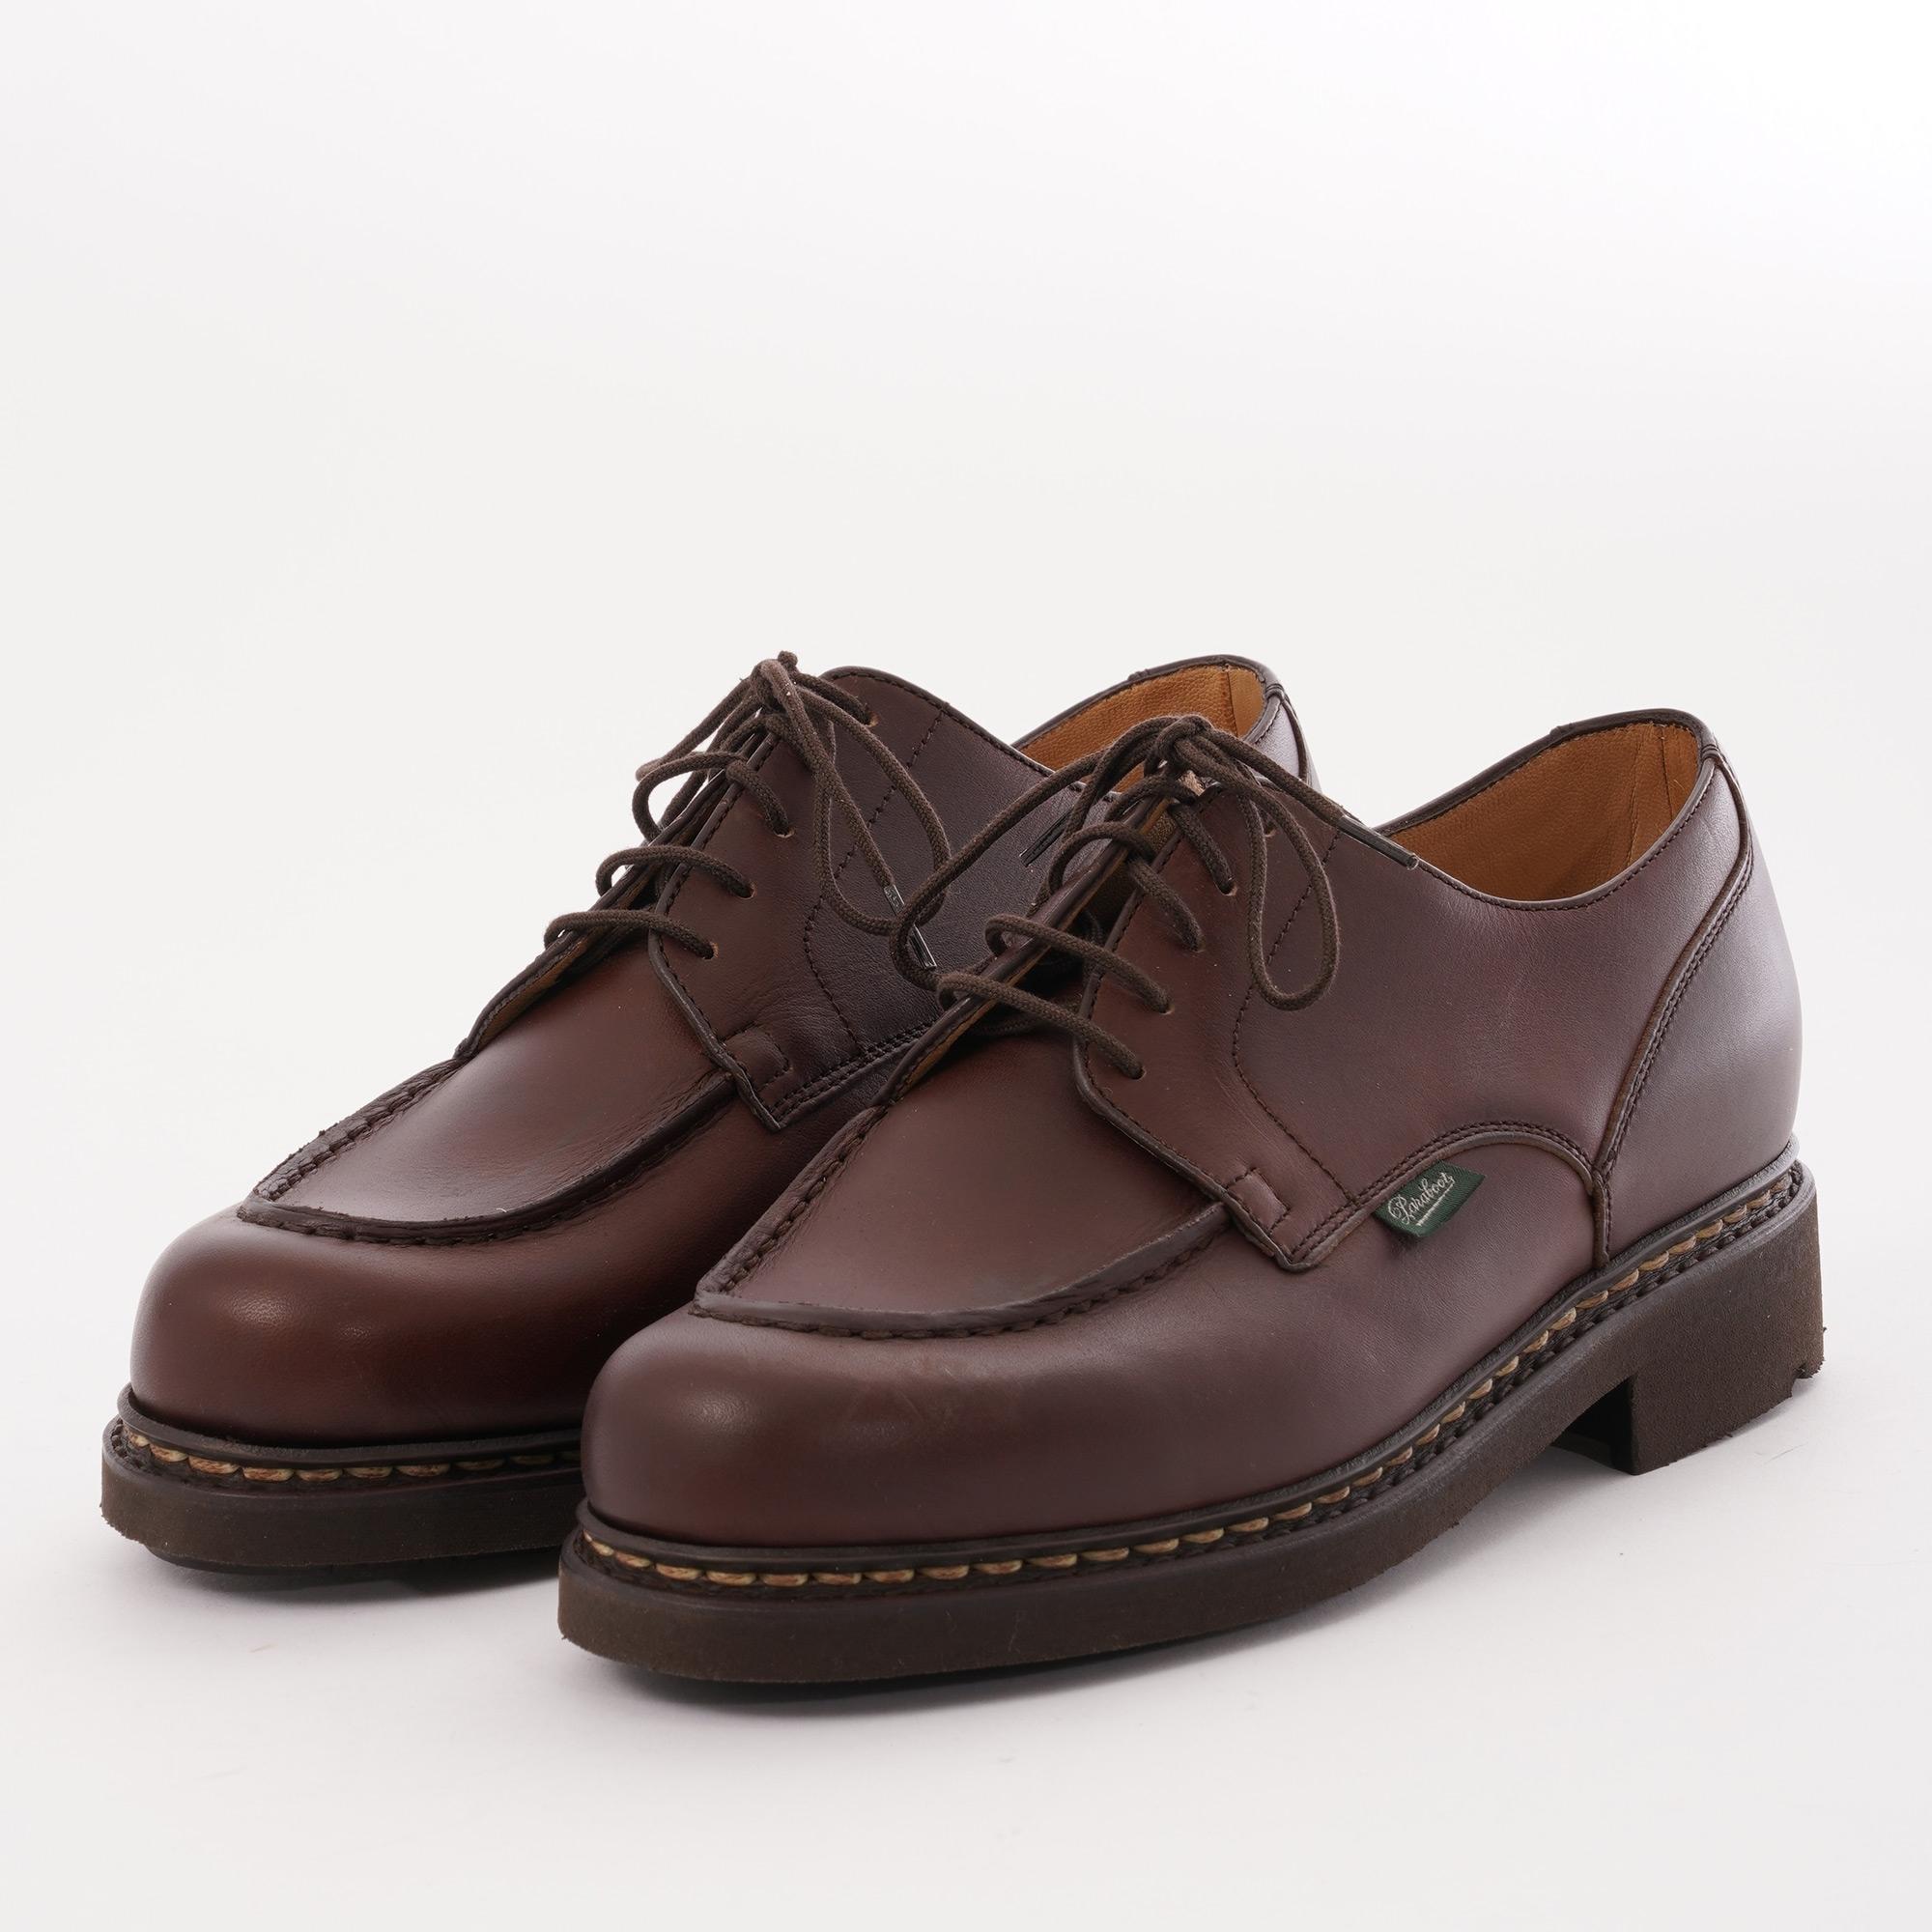 Paraboot Chambord Shoe - Cafe-maroon for Men - Save 37% - Lyst